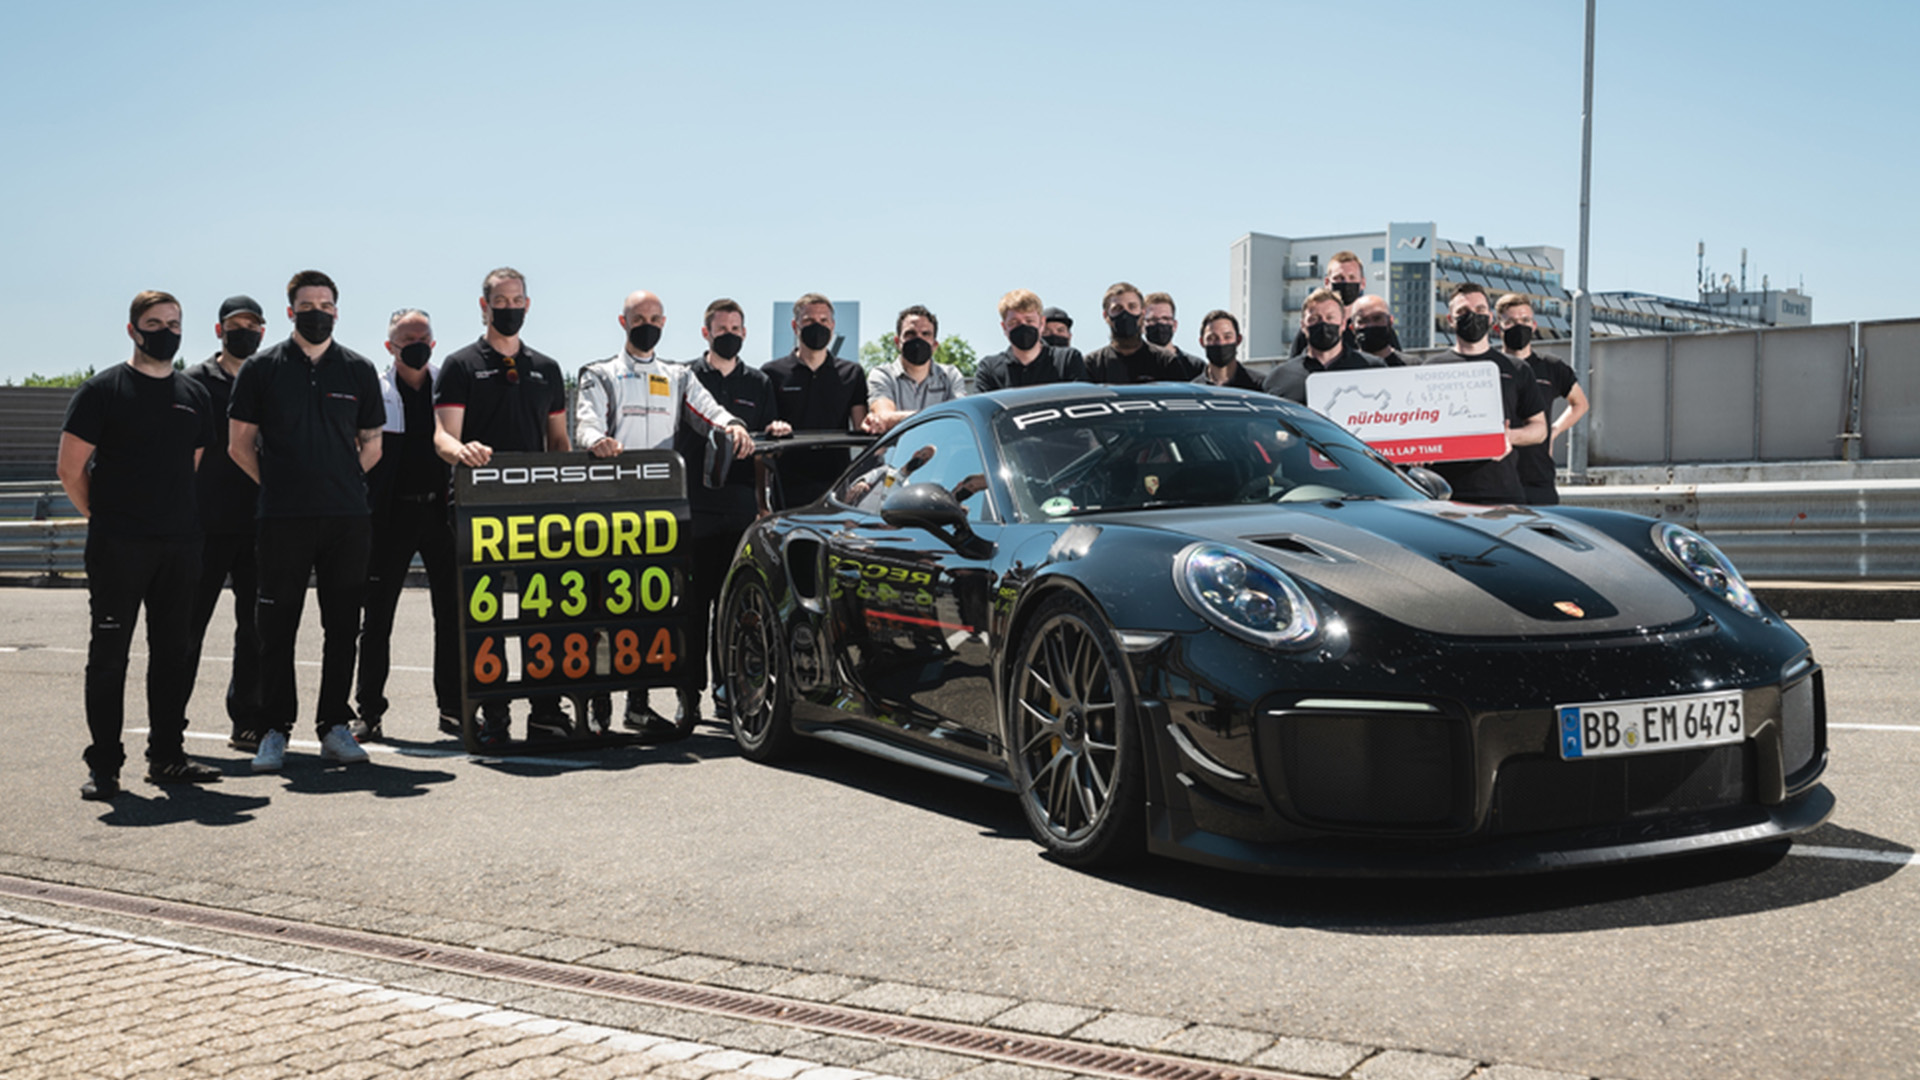 Manthey-Racing crew, Porsche 911 GT2 RS, Lap record Nürburgring 2021